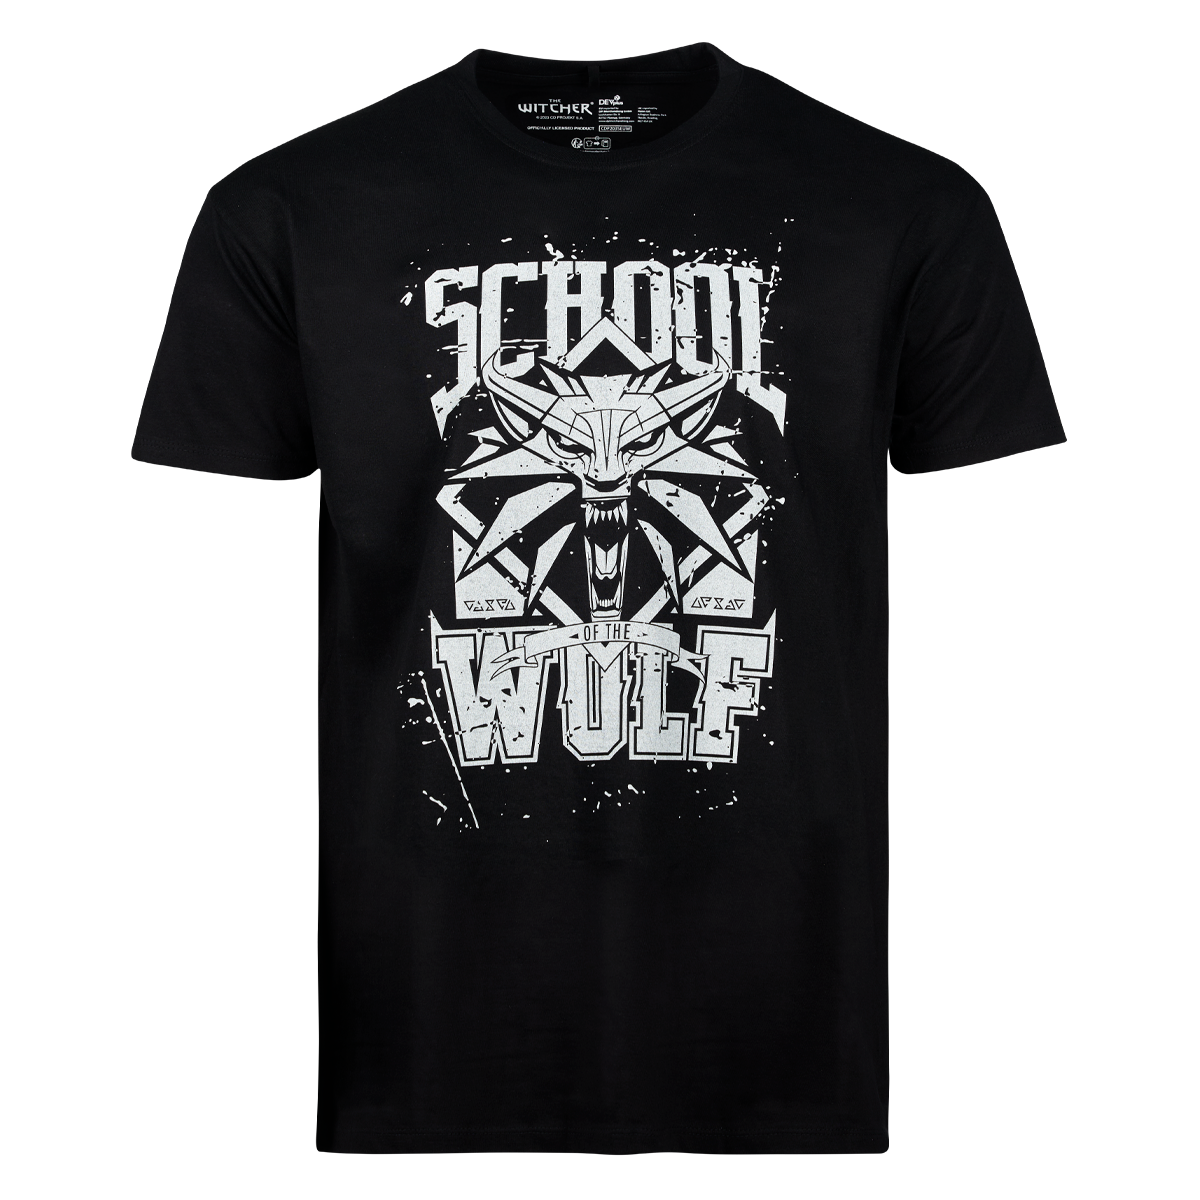 The Witcher T-Shirt "School of the Wolf" Black L